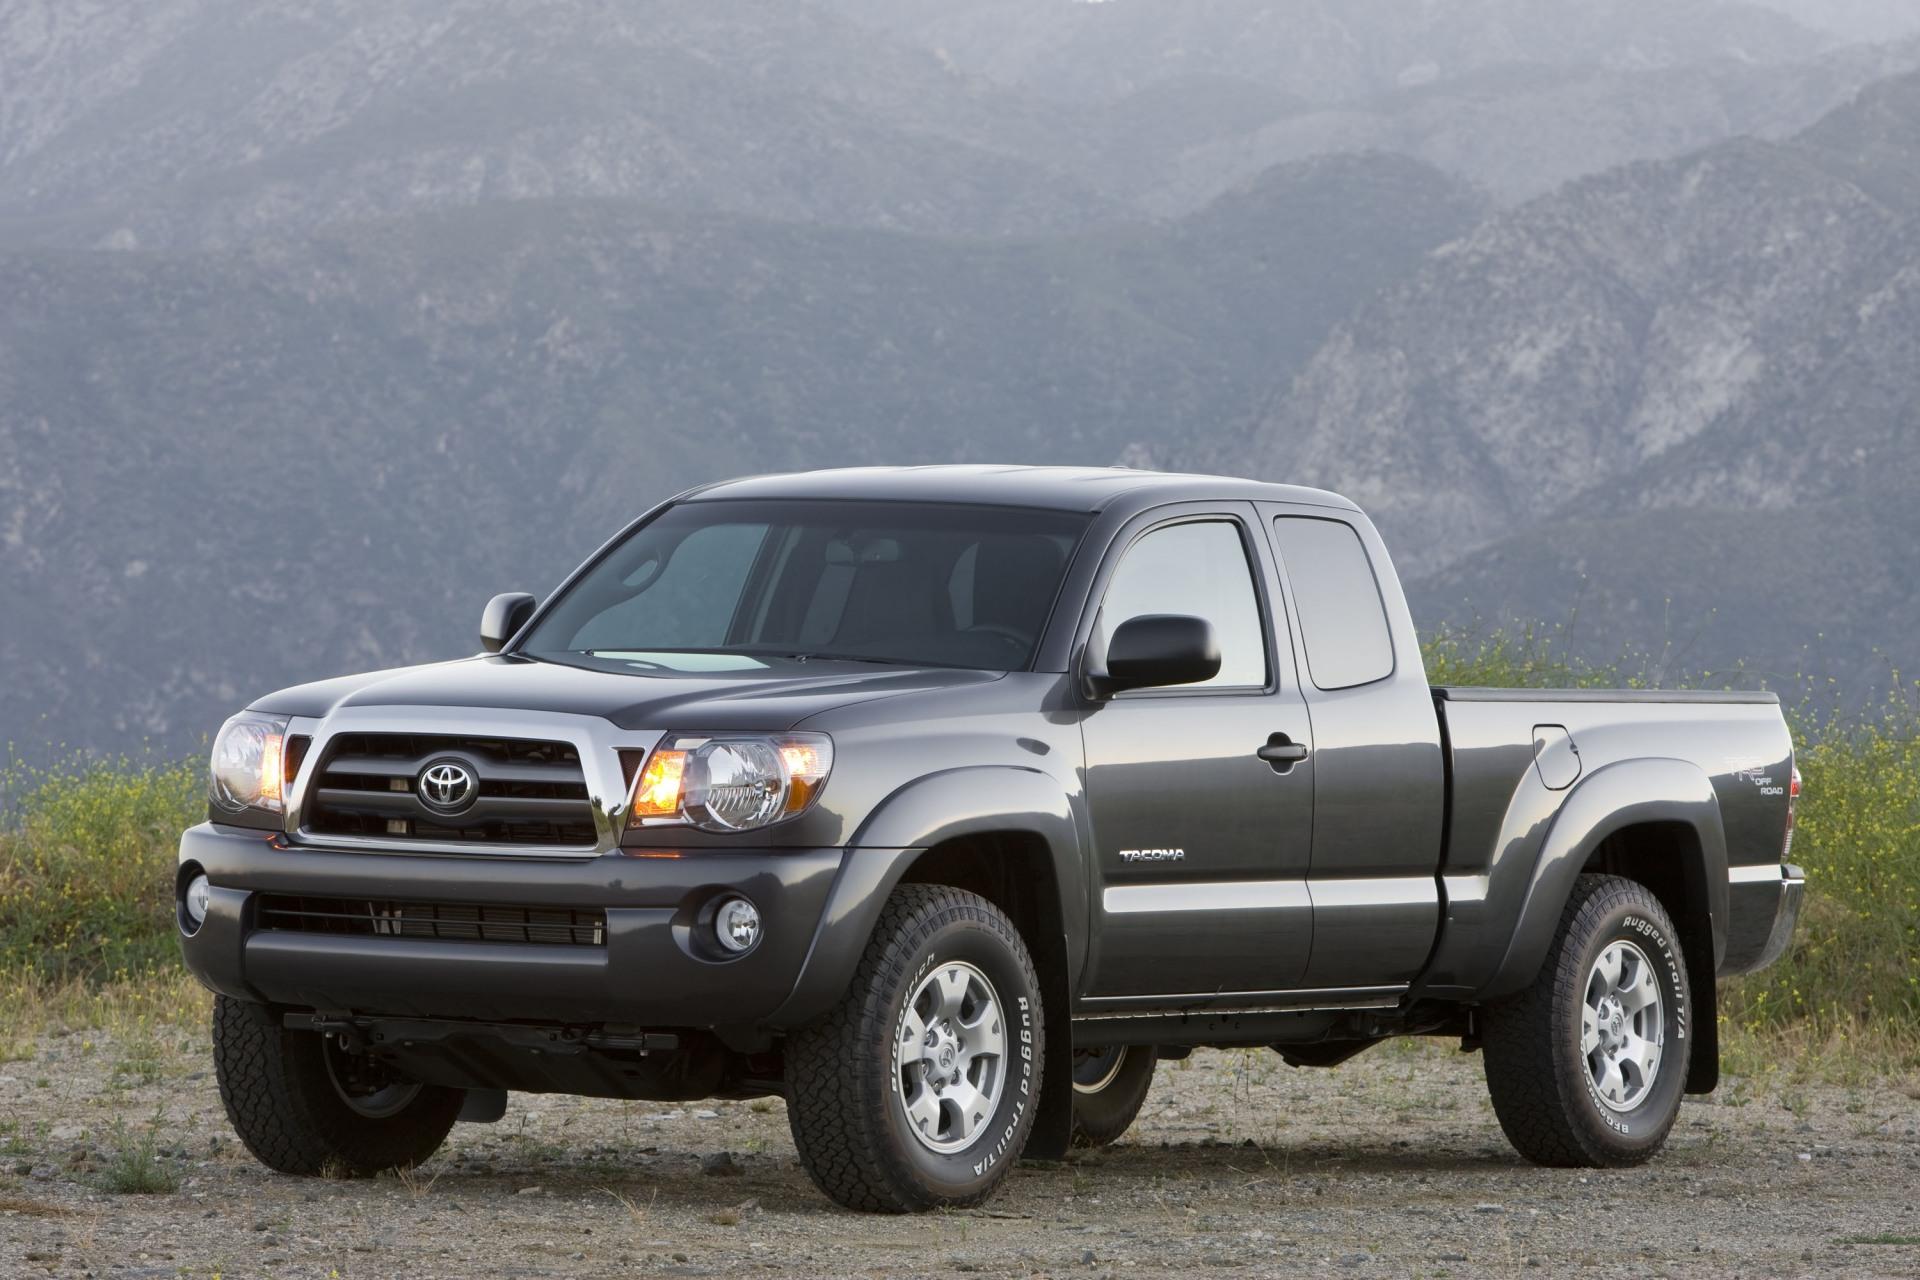 Toyota Tacoma Wallpaper 6696 Hd Wallpapers in Cars   Imagescicom 1920x1280